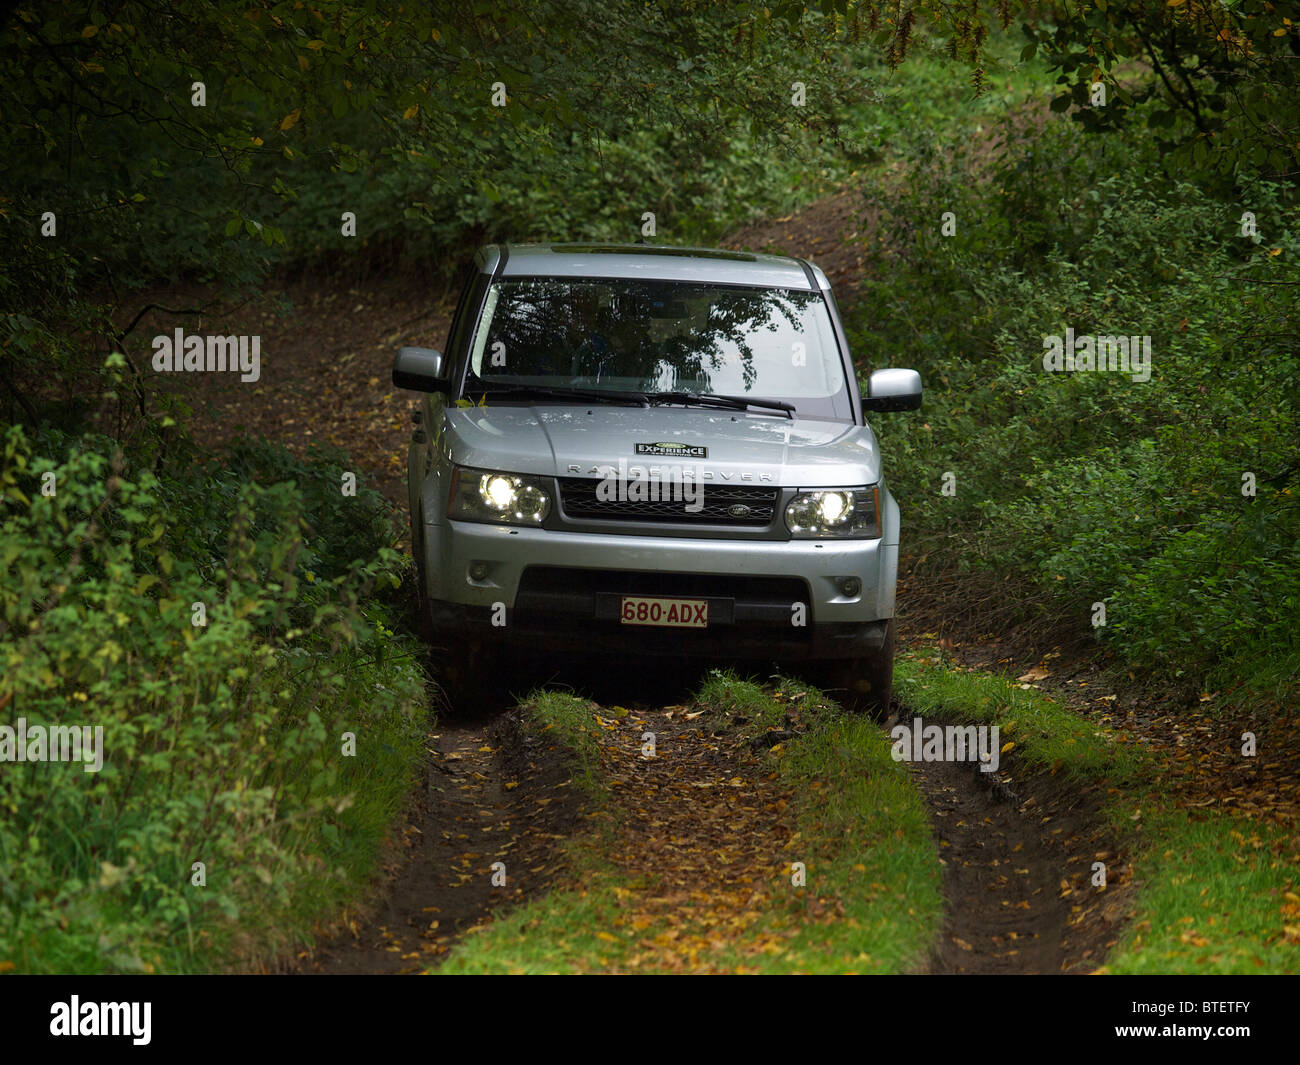 Range rover Sport driving offroad at the Domaine d'Arthey estate in Belgium Stock Photo